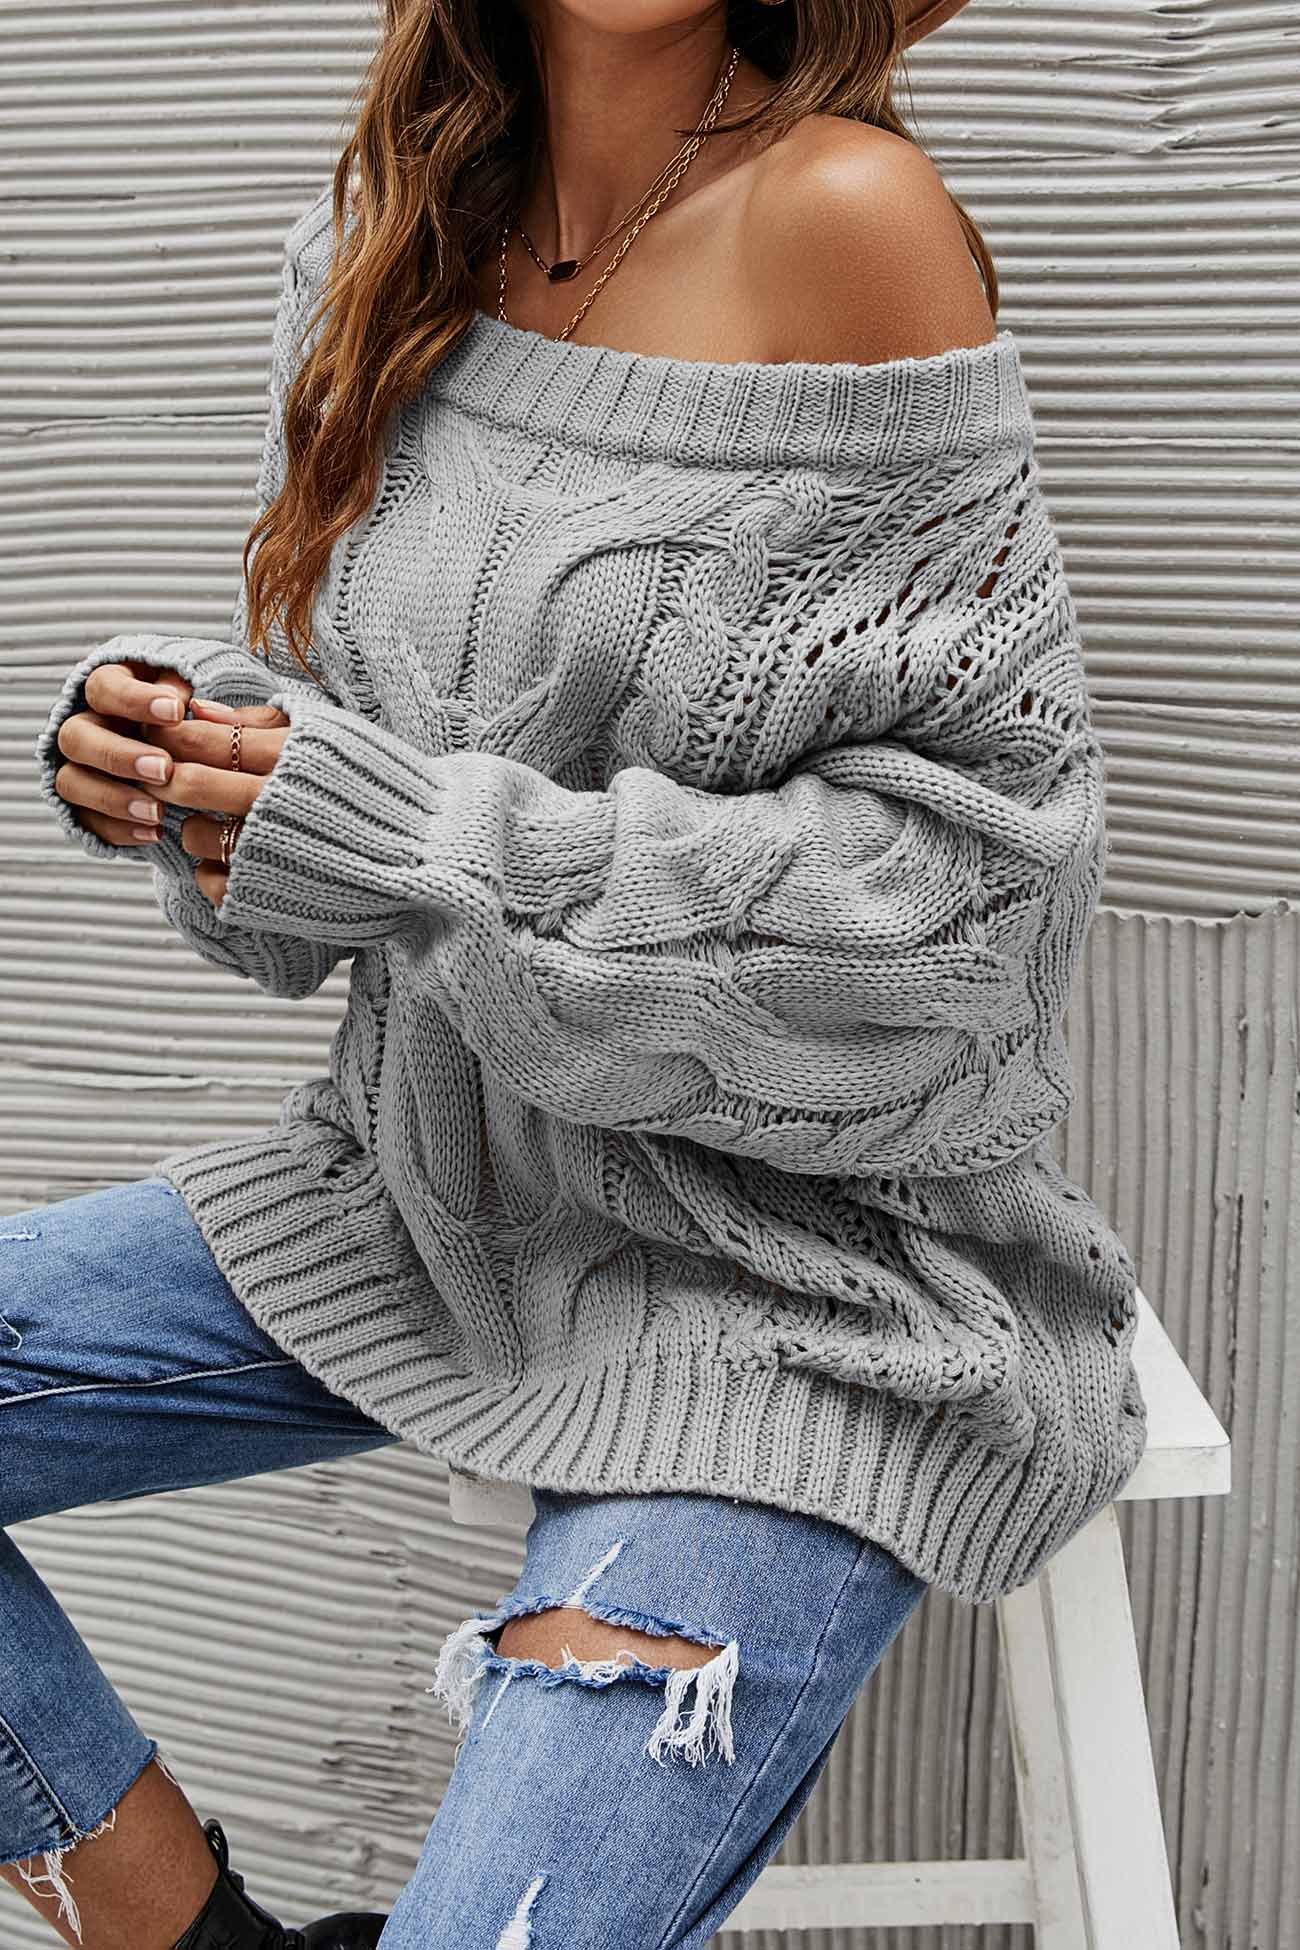 ADAGRO Cozy Sweater Drop Shoulder Cable Knit Sweater & Knit Pants